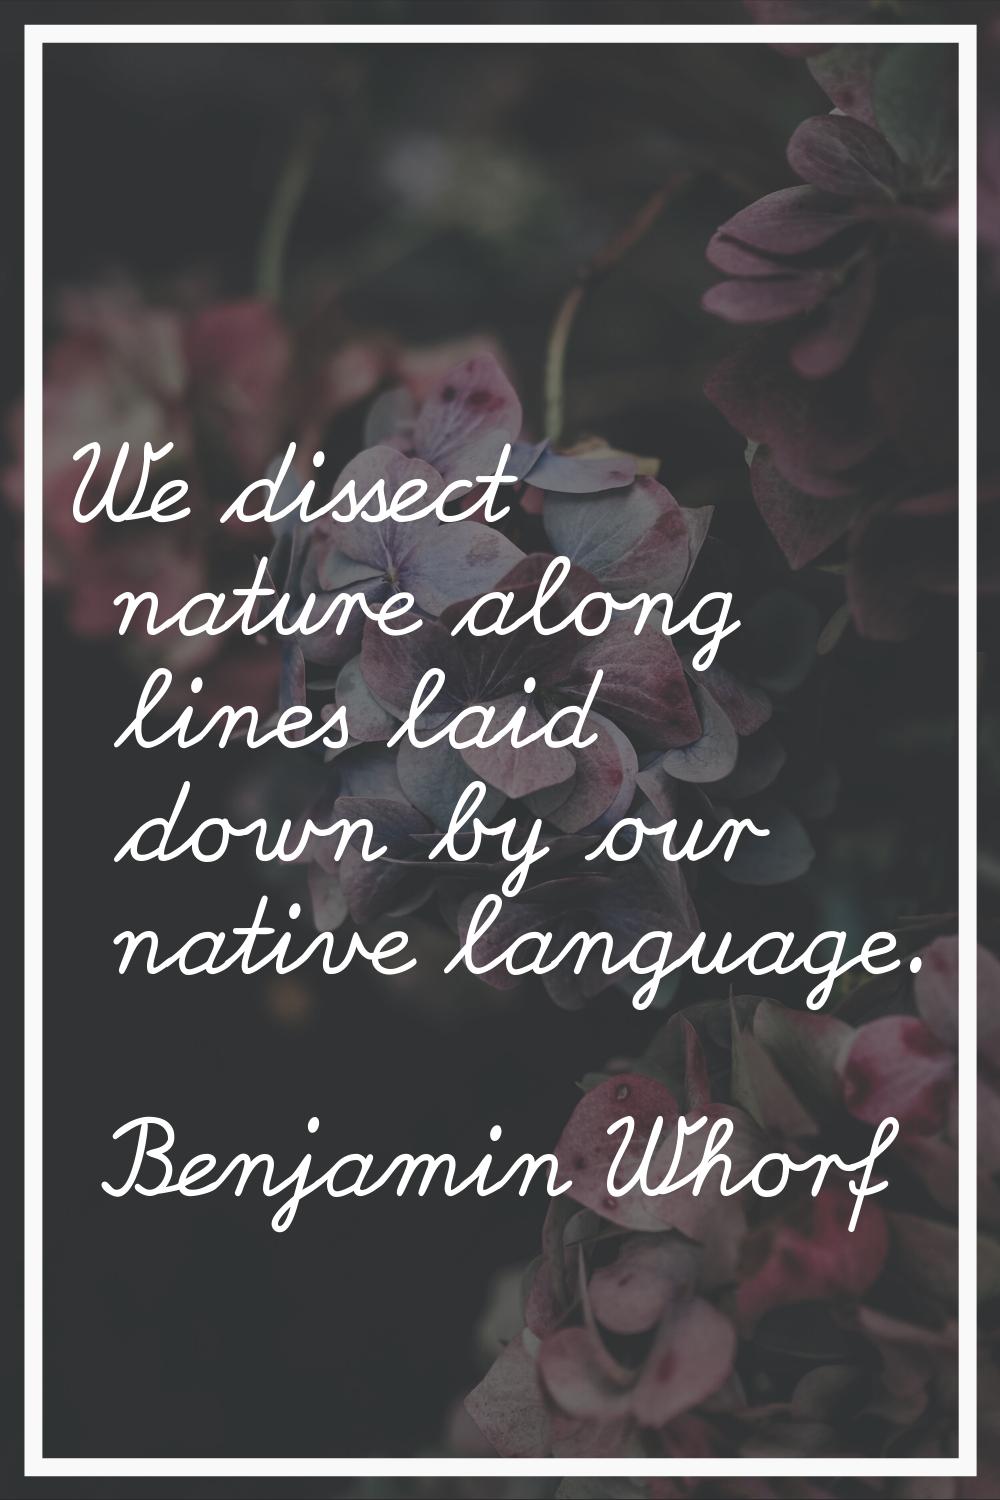 We dissect nature along lines laid down by our native language.